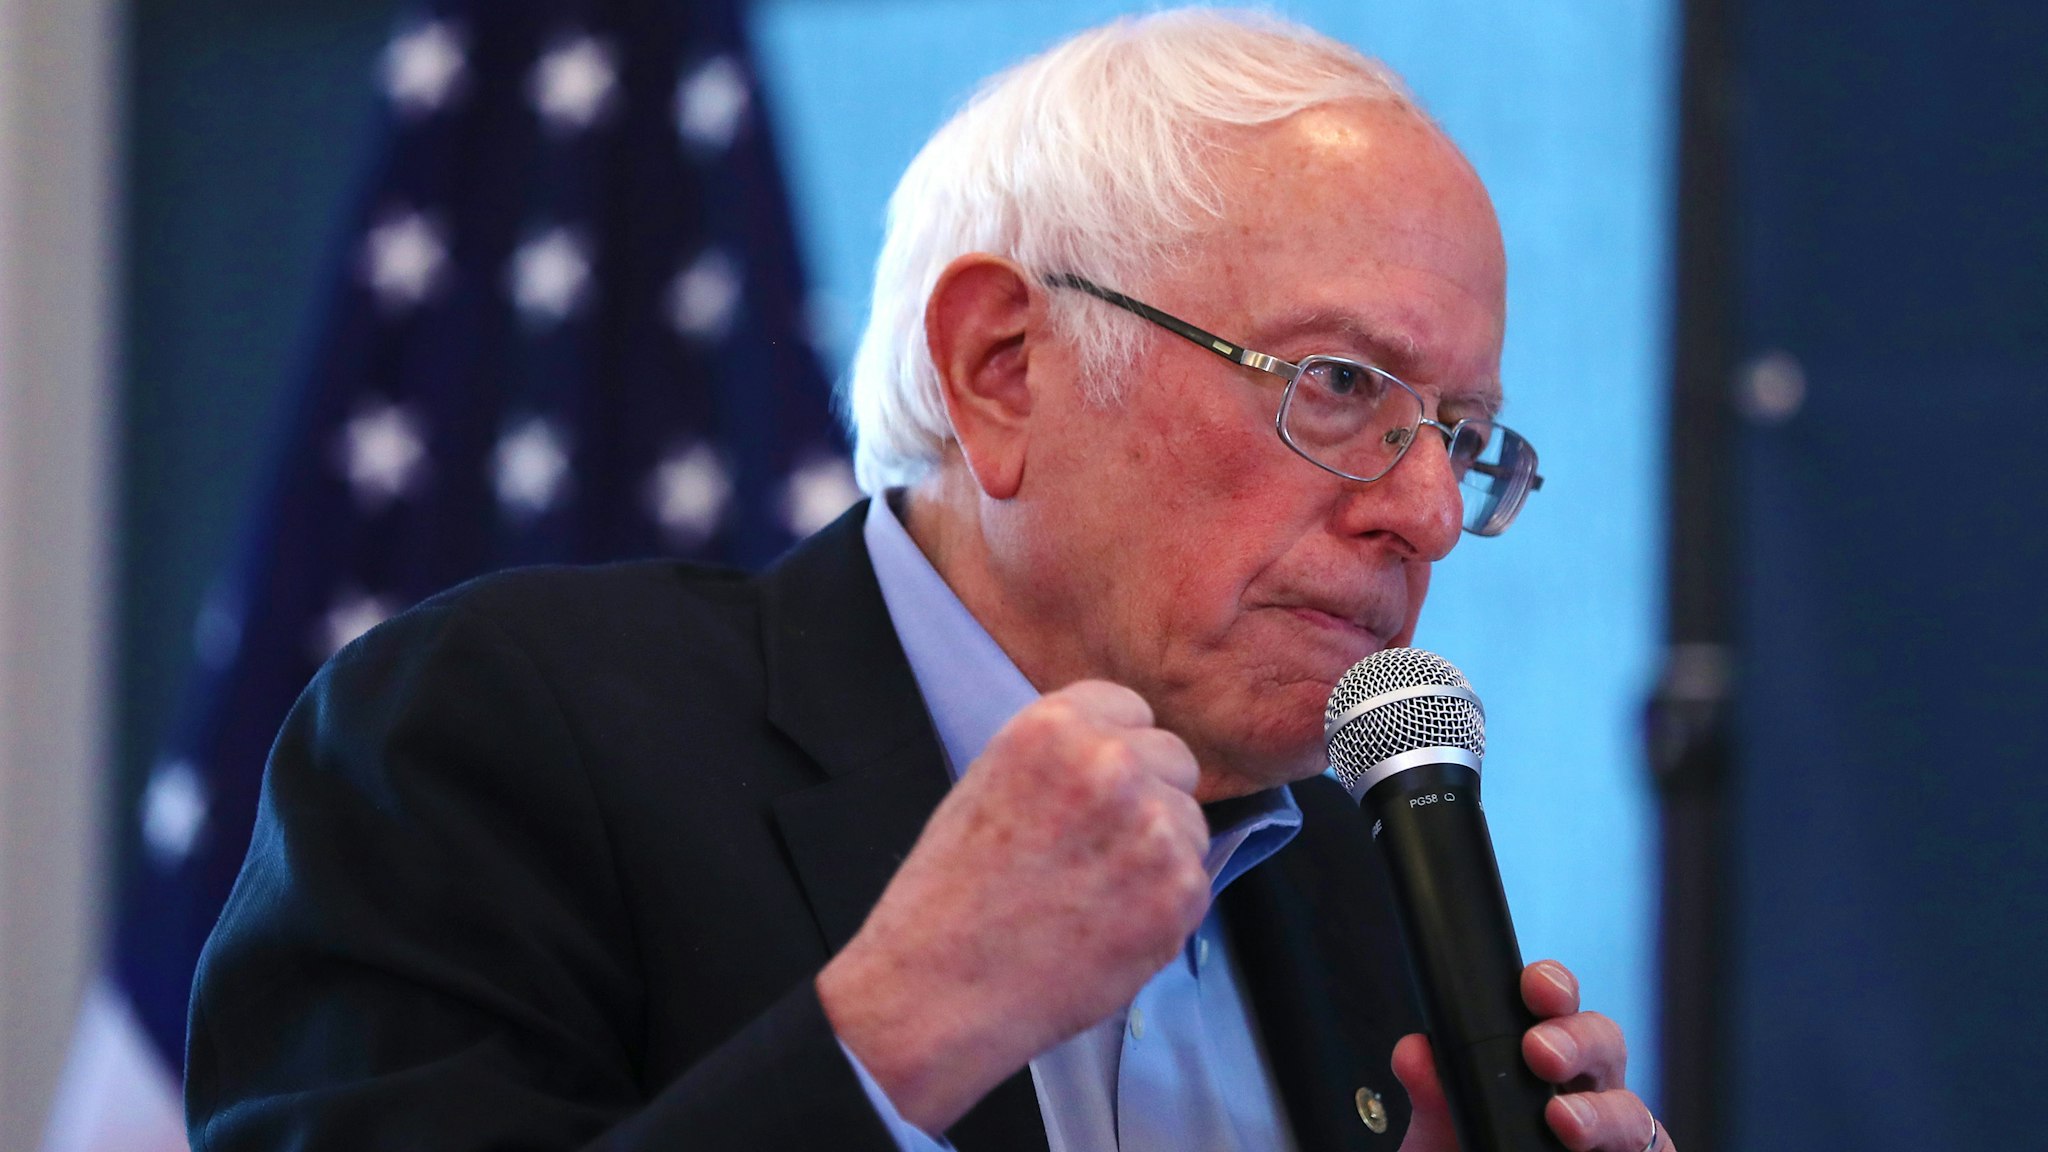 WEST DES MOINES, IOWA - DECEMBER 30: Democratic presidential candidate Sen. Bernie Sanders (D-VT) speaks during a campaign event at NOAH's Events Venue on December 30, 2019 in West Des Moines, Iowa. The 2020 Iowa Democratic caucuses will take place on February 3, 2020, making it the first nominating contest for the Democratic Party in choosing their presidential candidate to face Donald Trump in the 2020 election.